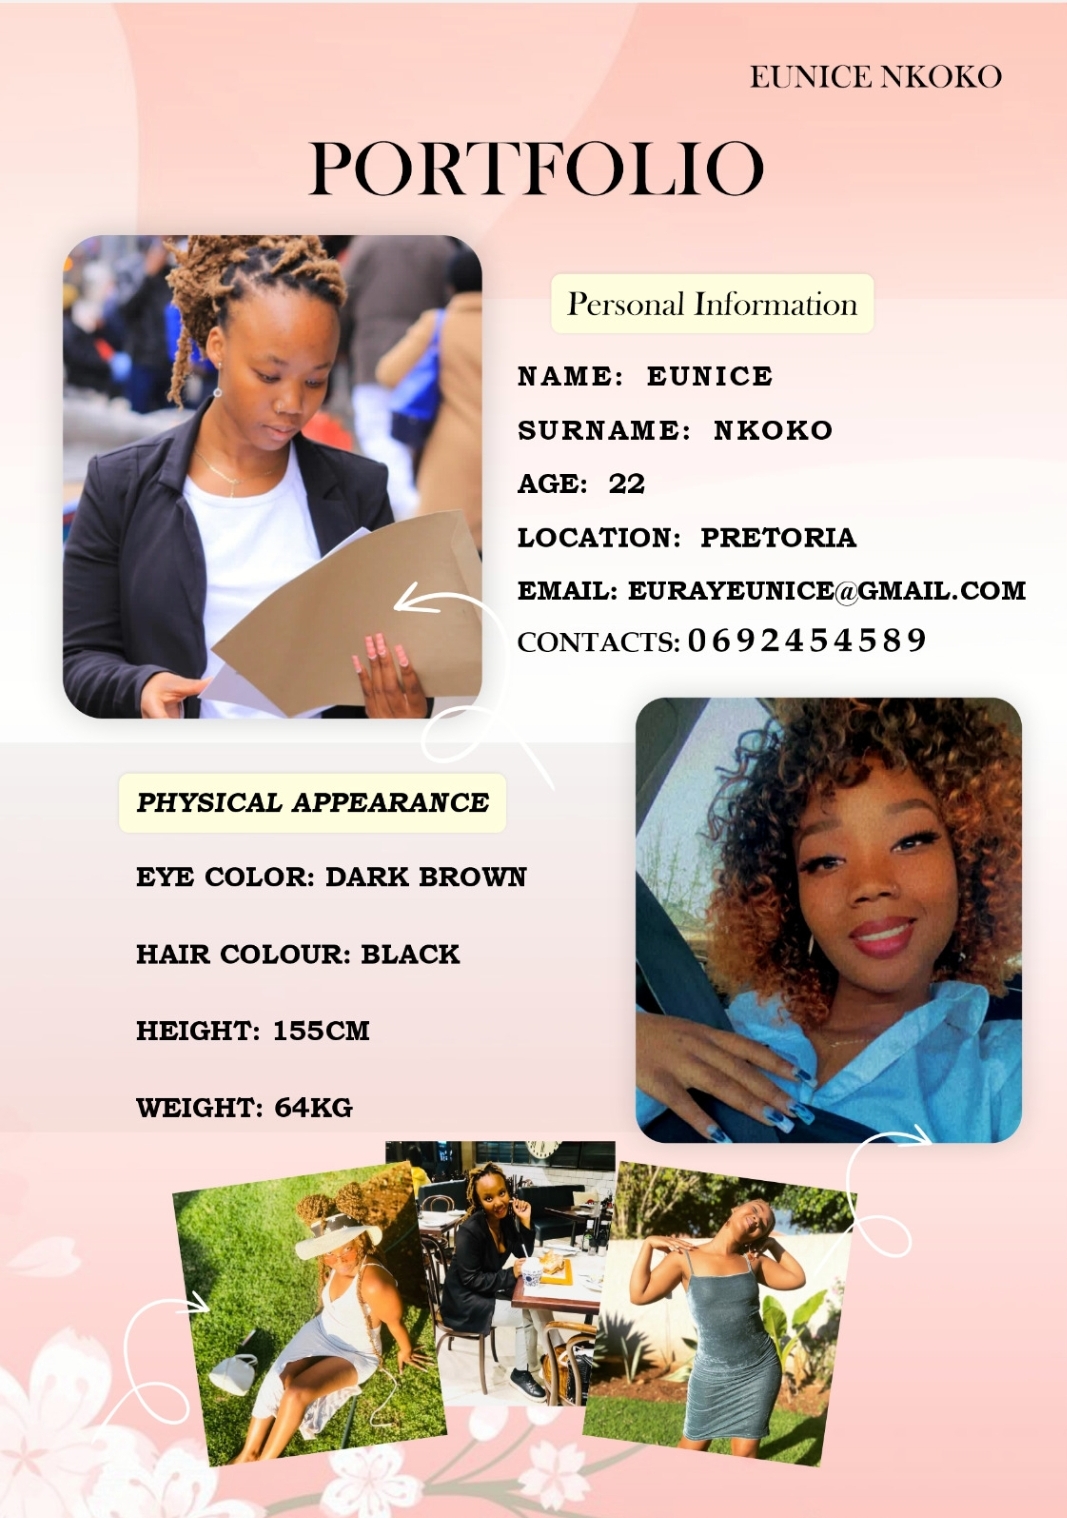 EUNICE NKOKO

PORTTIOLIO

 

PHYSICAL APPEARANCE

EYE COLOR: DARK BROWN

HAIR COLOUR: BLACK

HEIGHT: 155CM

WEIGHT: 64KG

Personal Information

NAME: EUNICE

SURNAME: NKOKO

AGE: 22

LOCATION: PRETORIA

EMAIL: EURAYEUNICE@GMAIL.COM
CONTACTS:0692454589